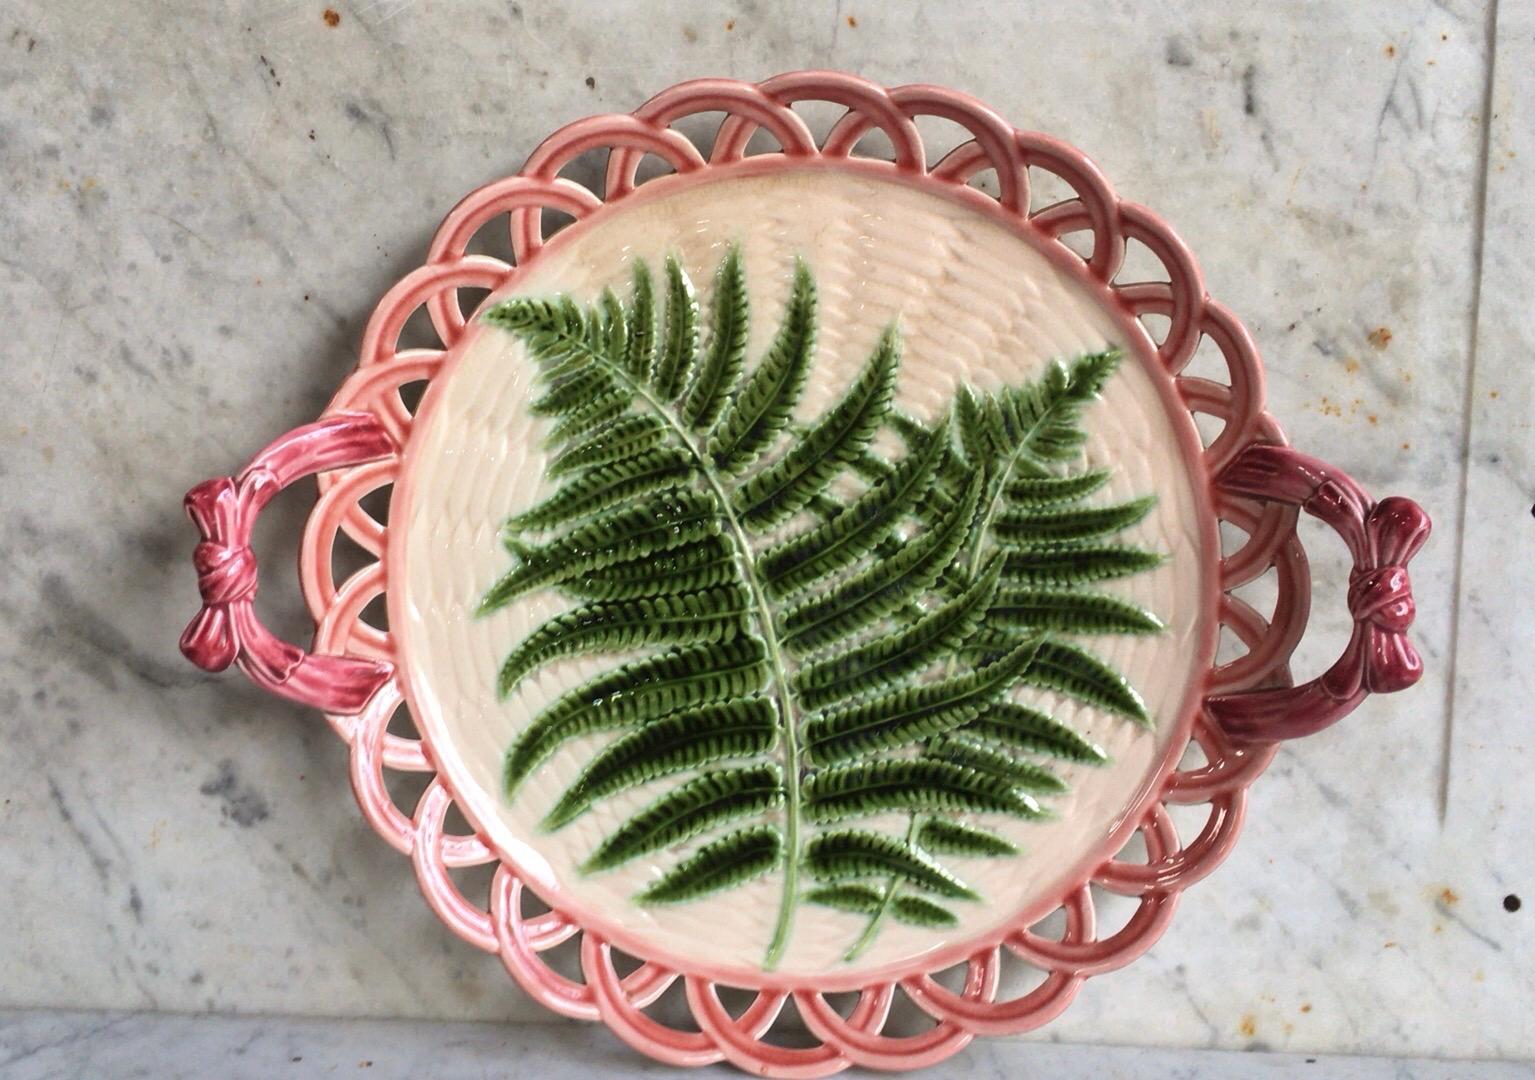 Oversize 19th century French Majolica handled reticulated platter signed Sarreguemines.
An elegant server with pink bows handles, on the center two larges ferns on a beige basketweave background.
Measures: Diameter / 16